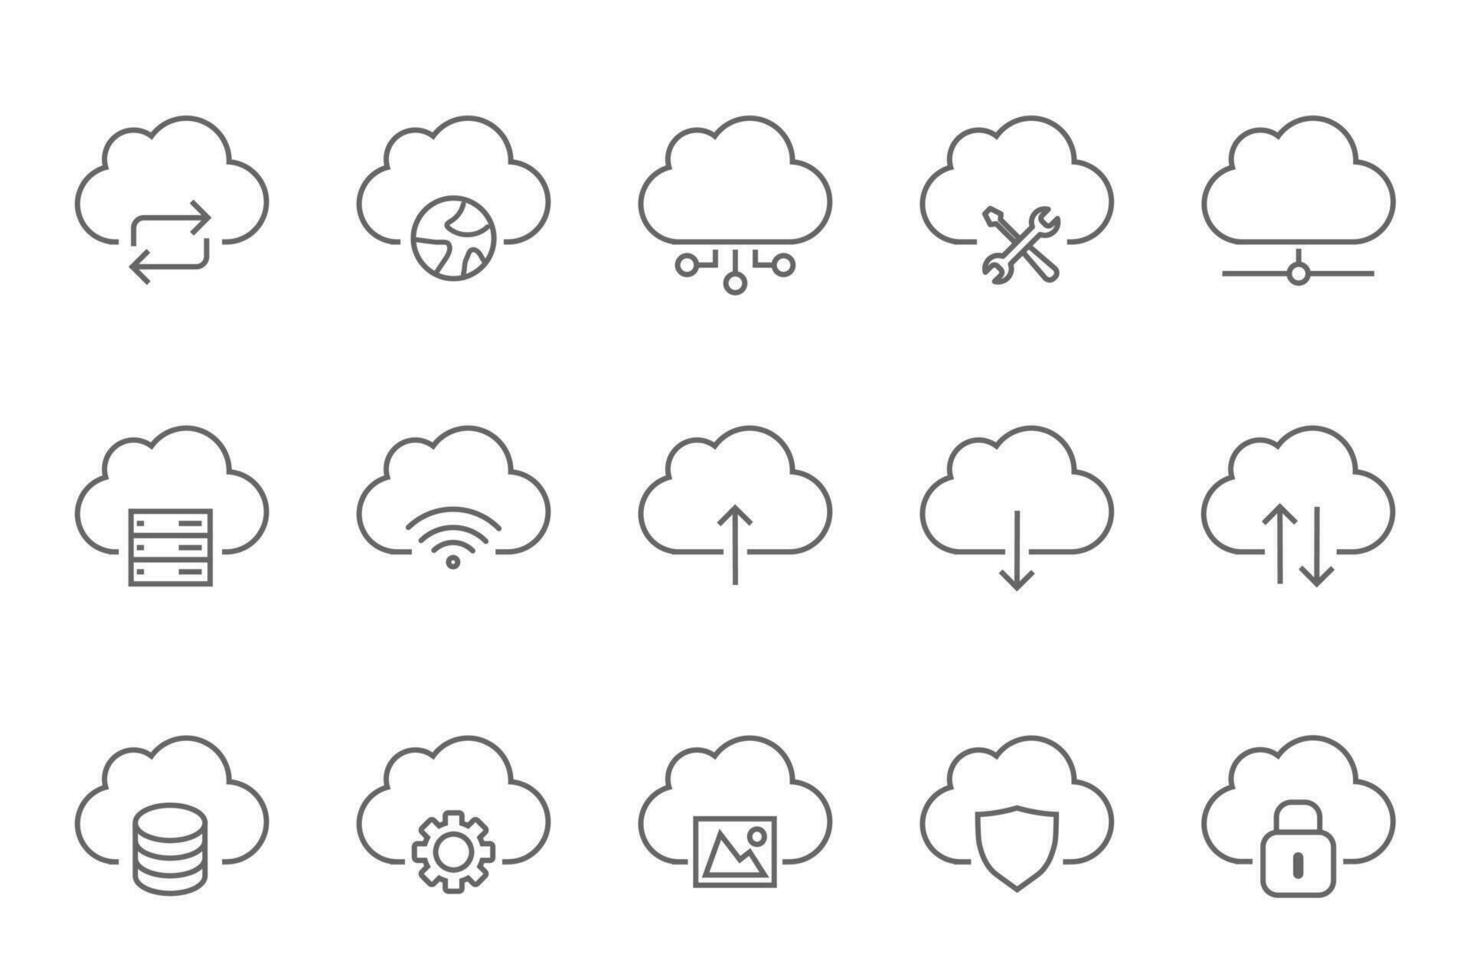 Set of 15 line icons related to data exchange, traffic, files, cloud, server. Outline icon collection.. Vector illustration